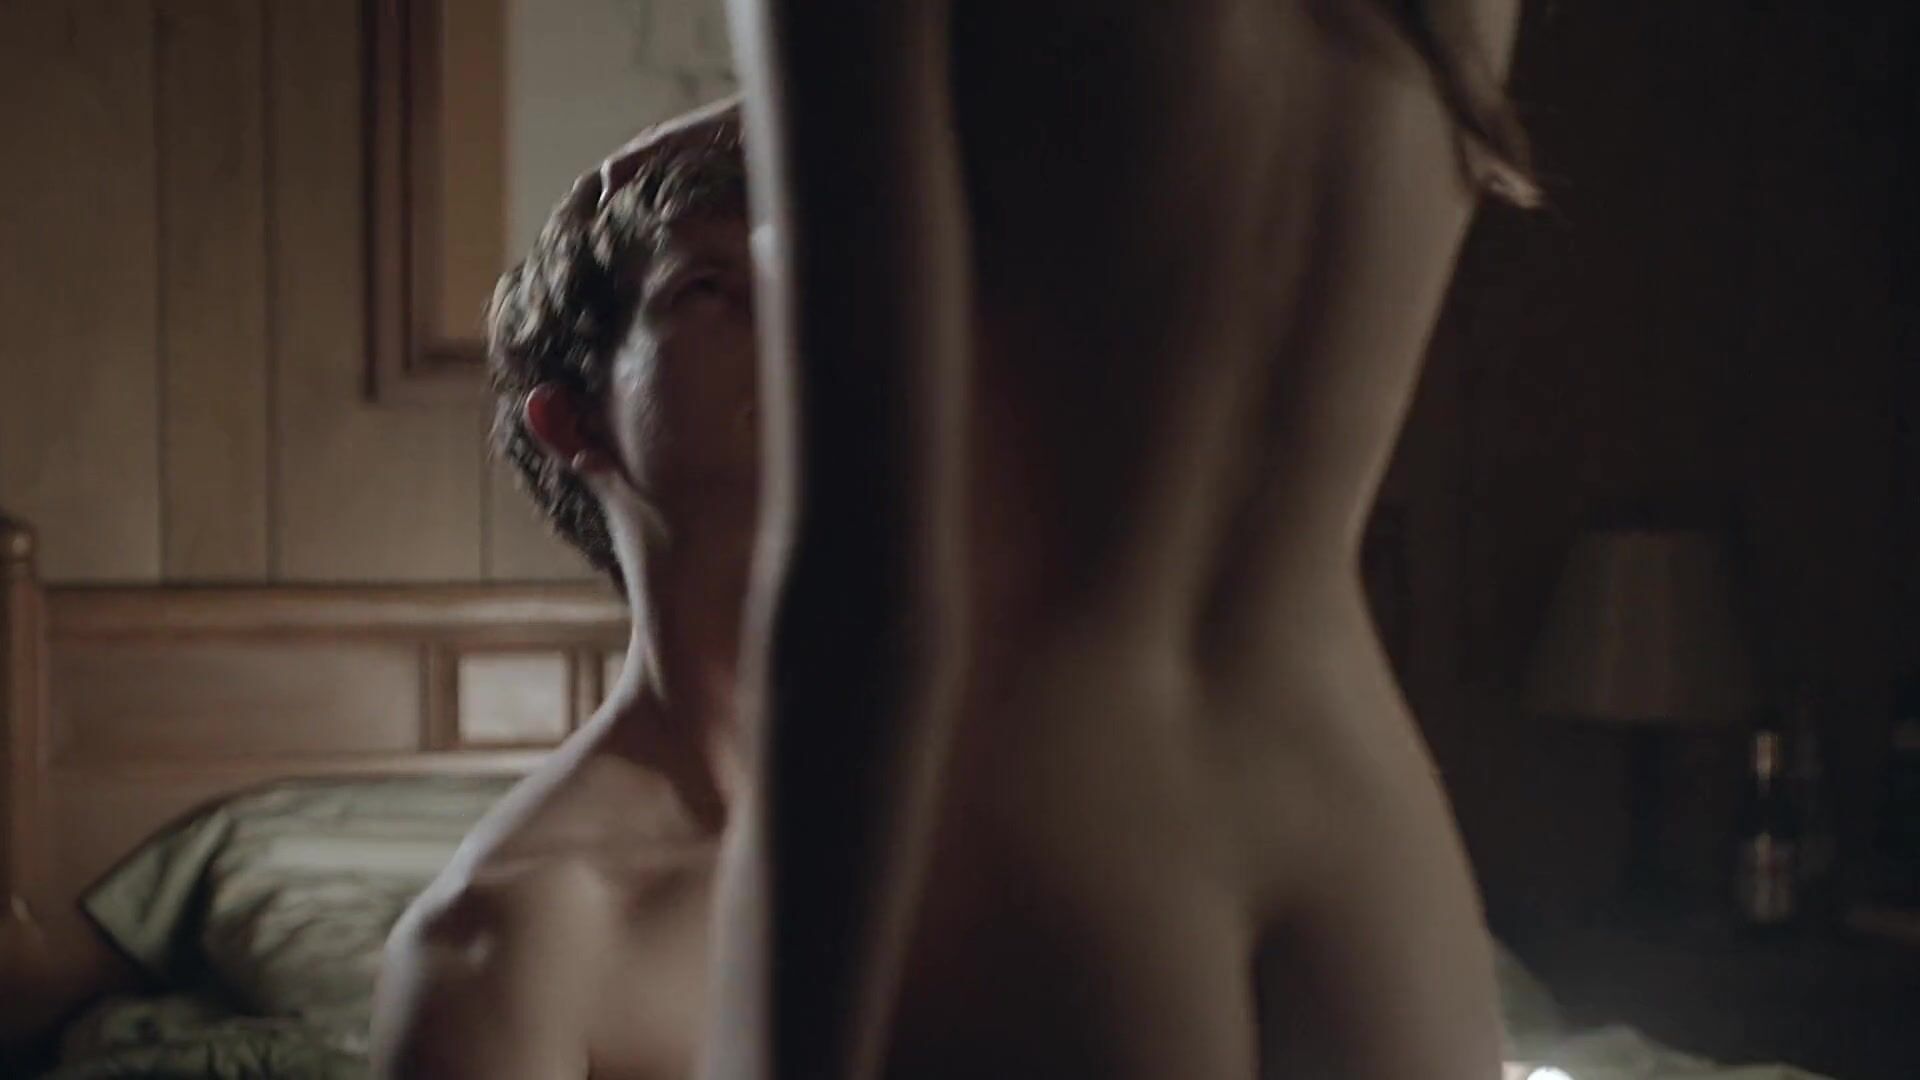 CzechTaxi Naked beauty Lili Simmons gets penetrated by the shy man in TV series Banshee S2 Nalgas - 1